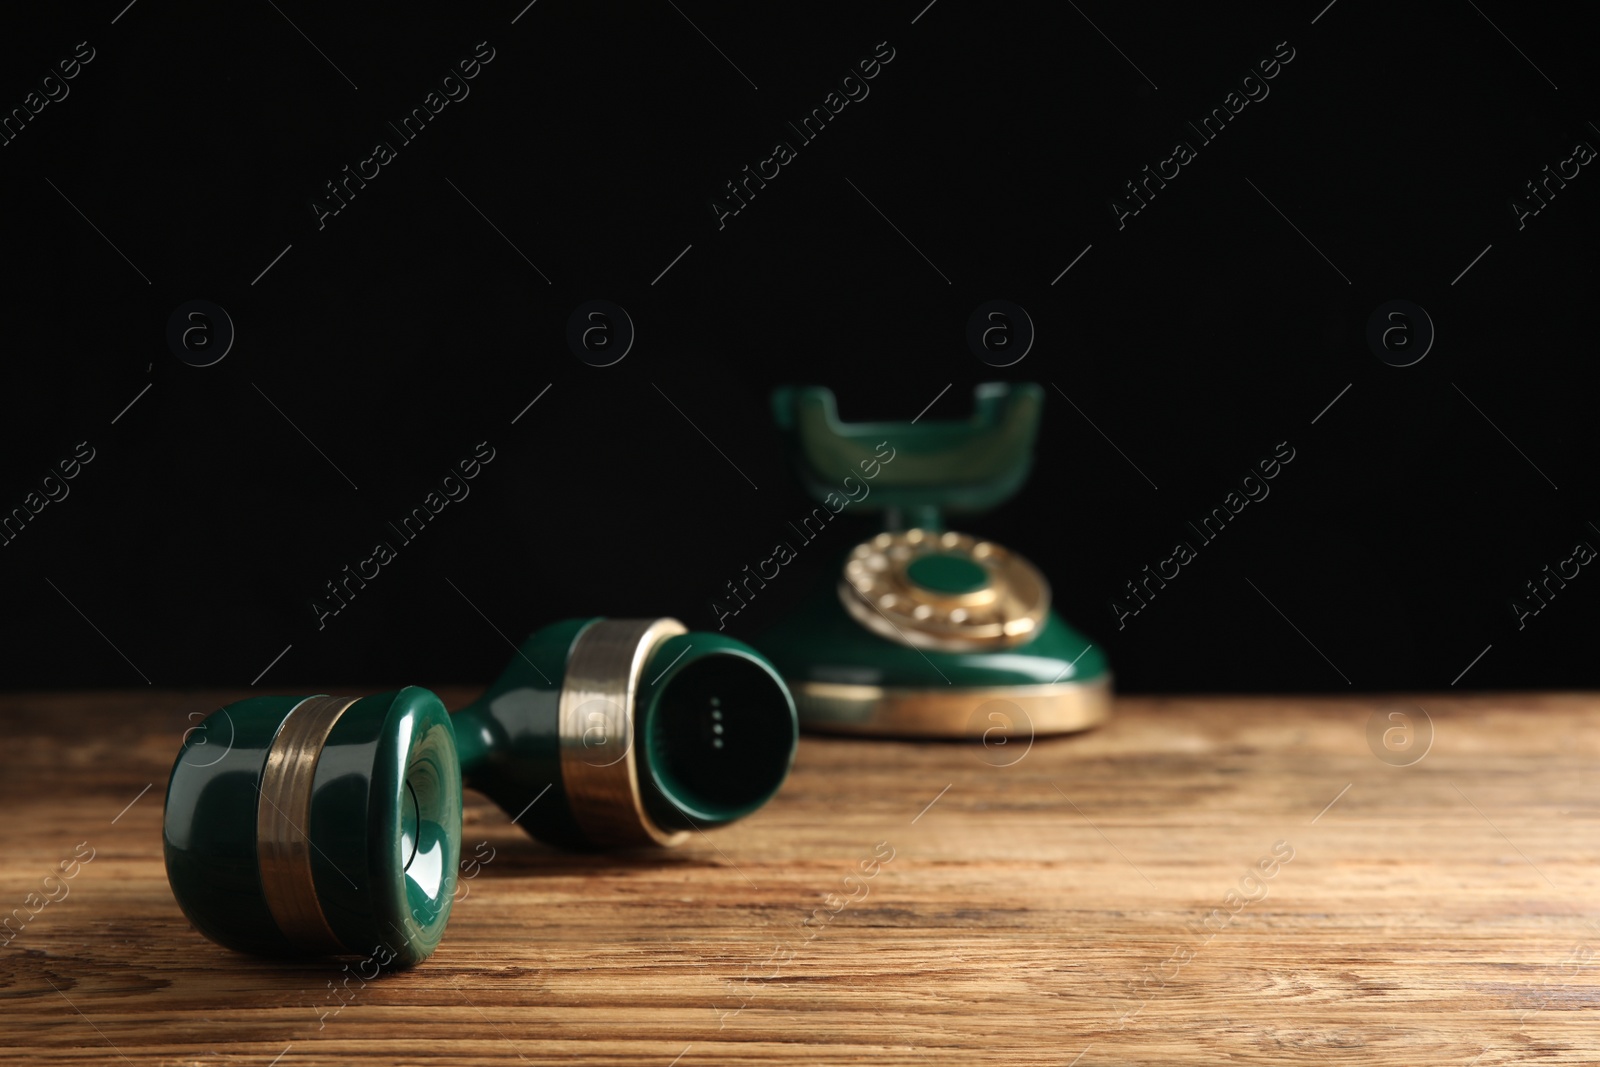 Photo of Handset of vintage corded phone on wooden table against black background, closeup